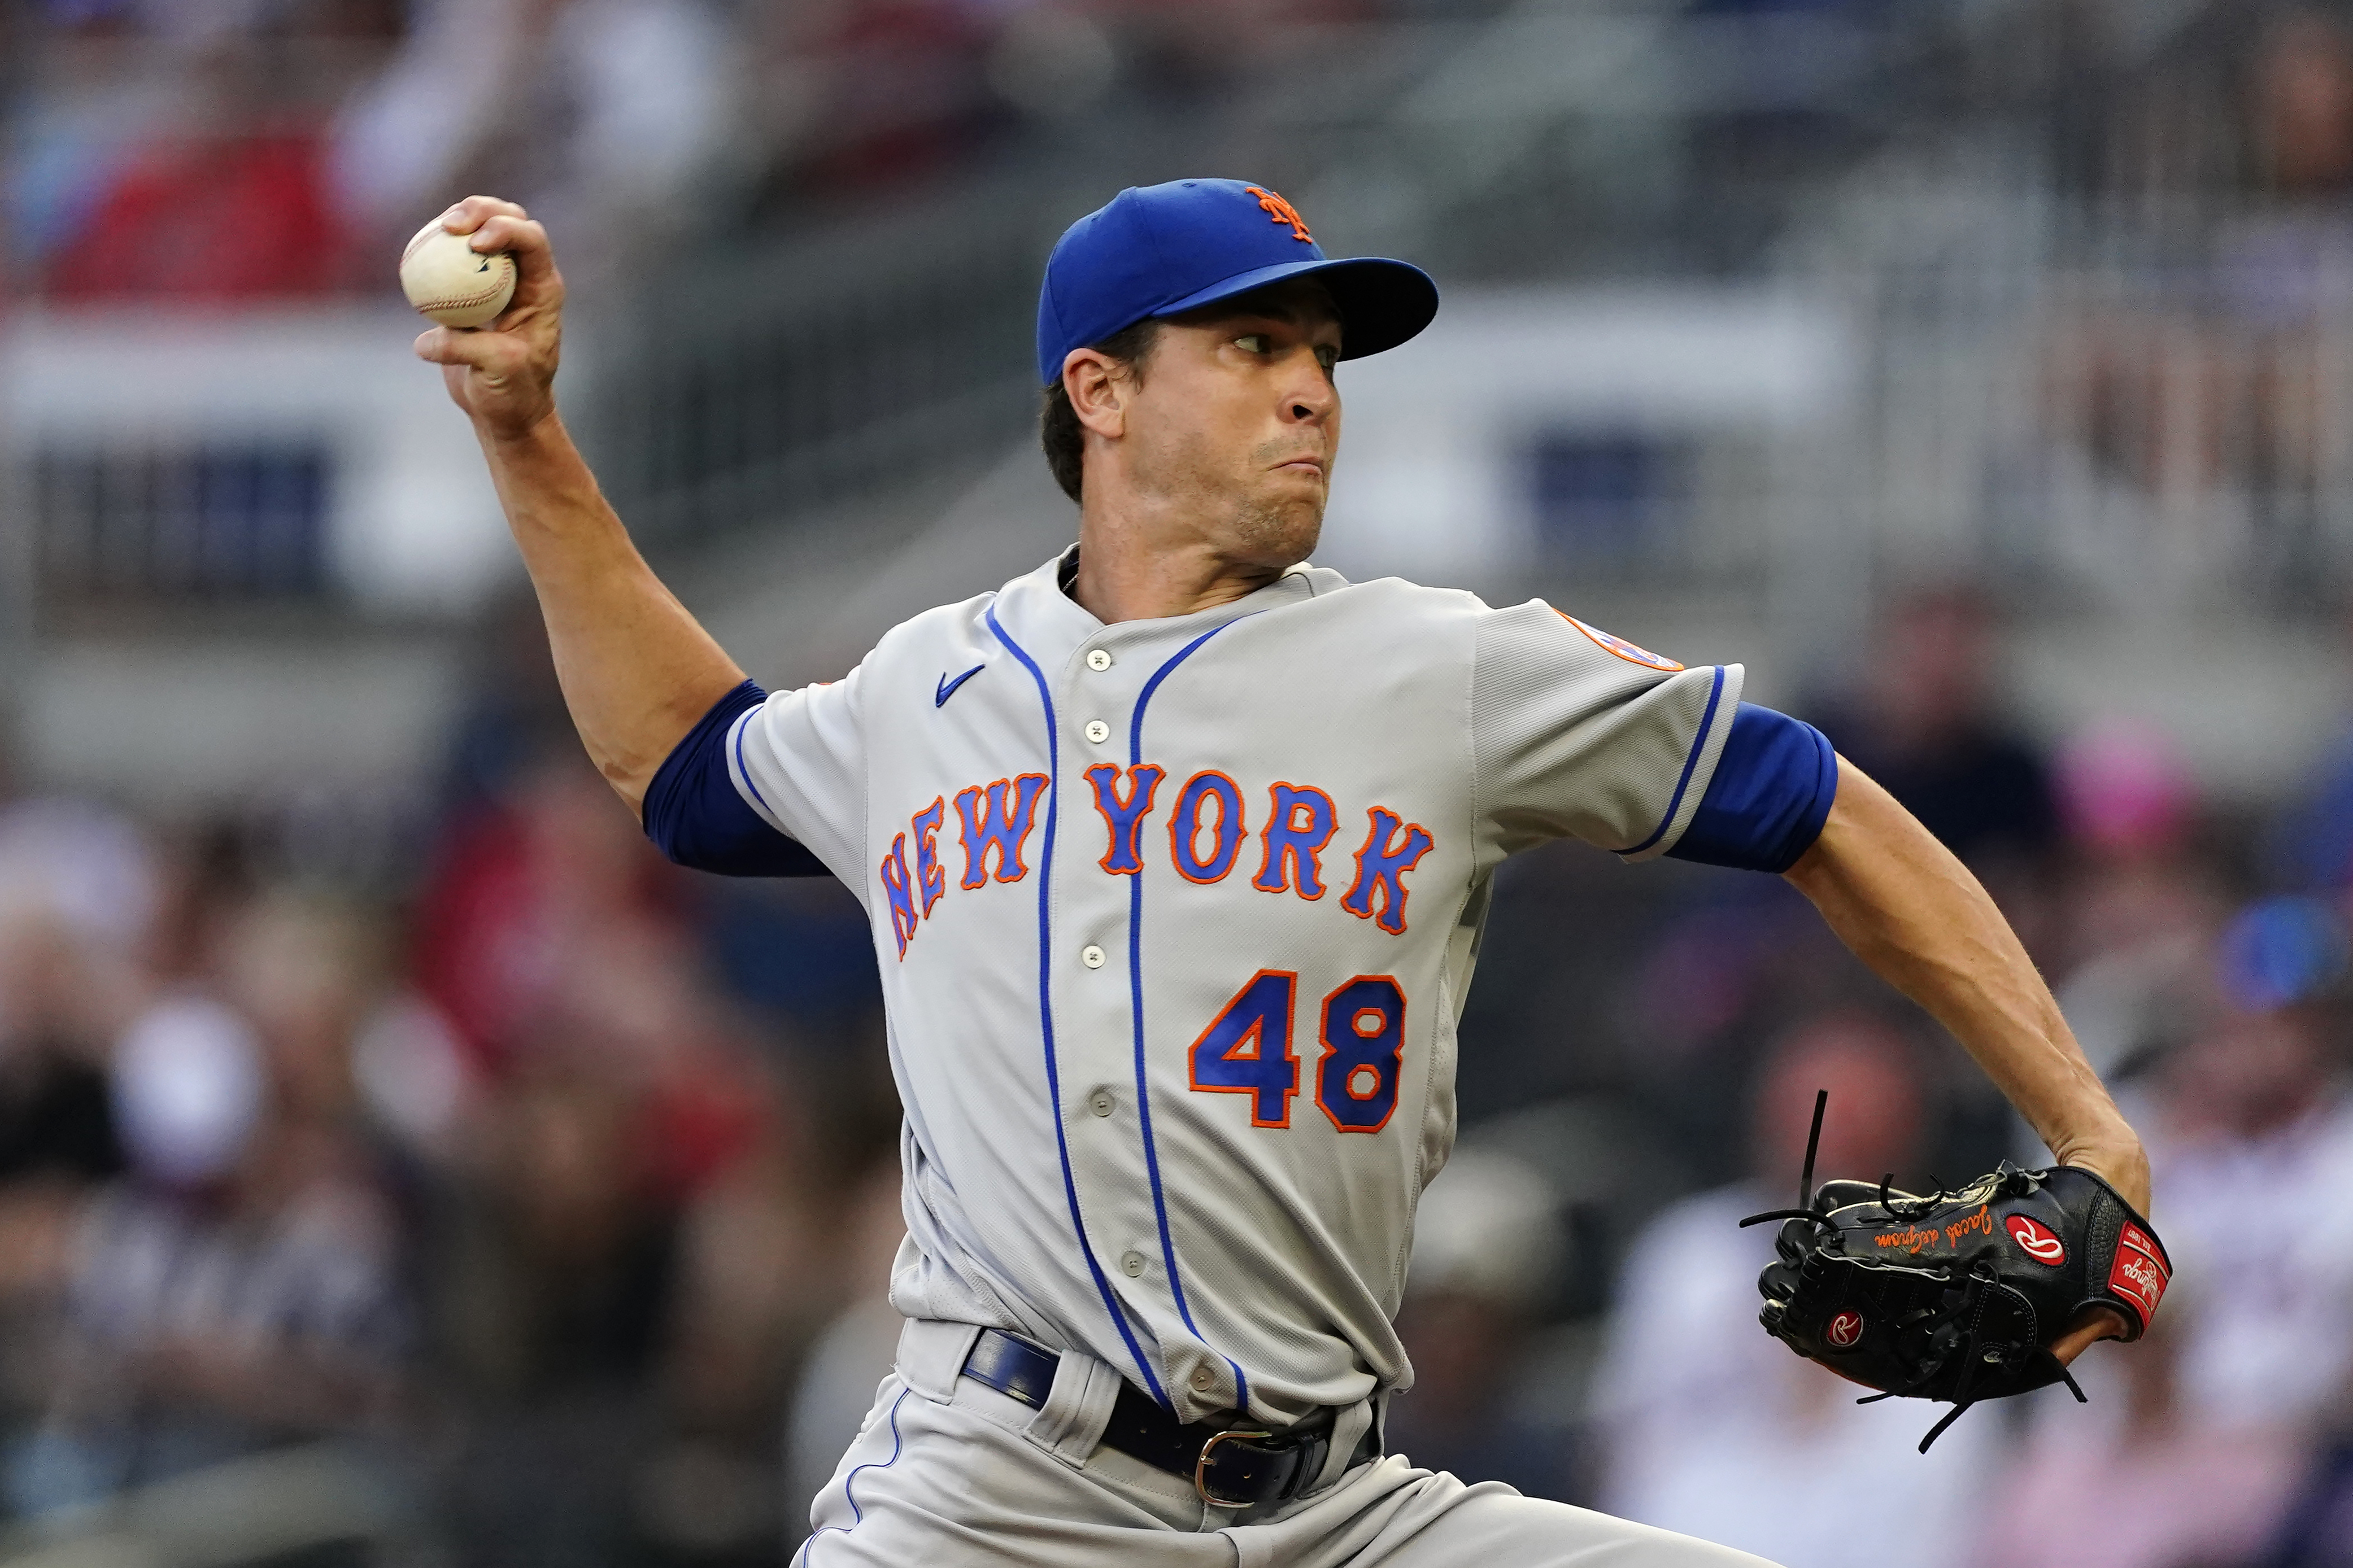 Mets ace Jacob deGrom expected to make stop in Syracuse for